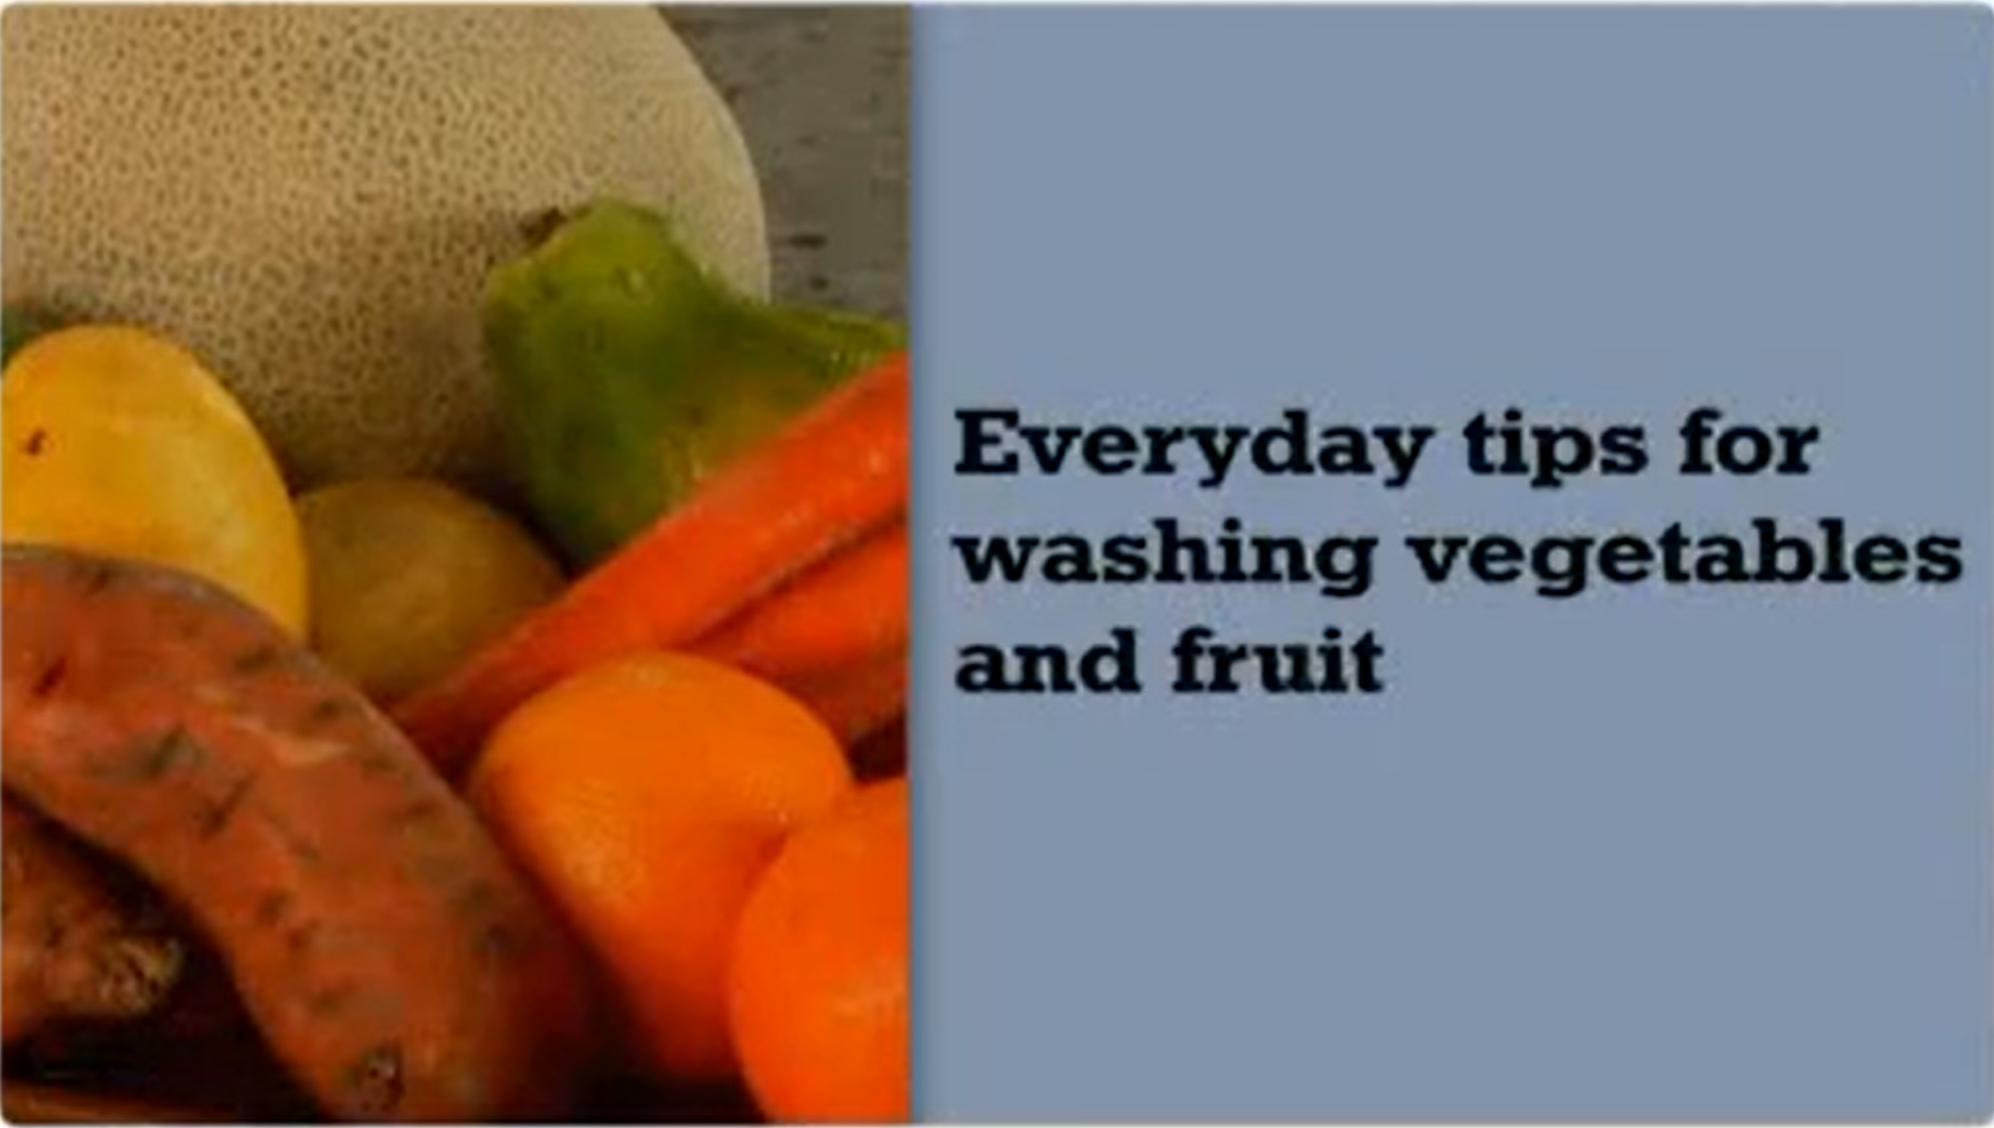 Everyday tips for washing vegetables and fruits